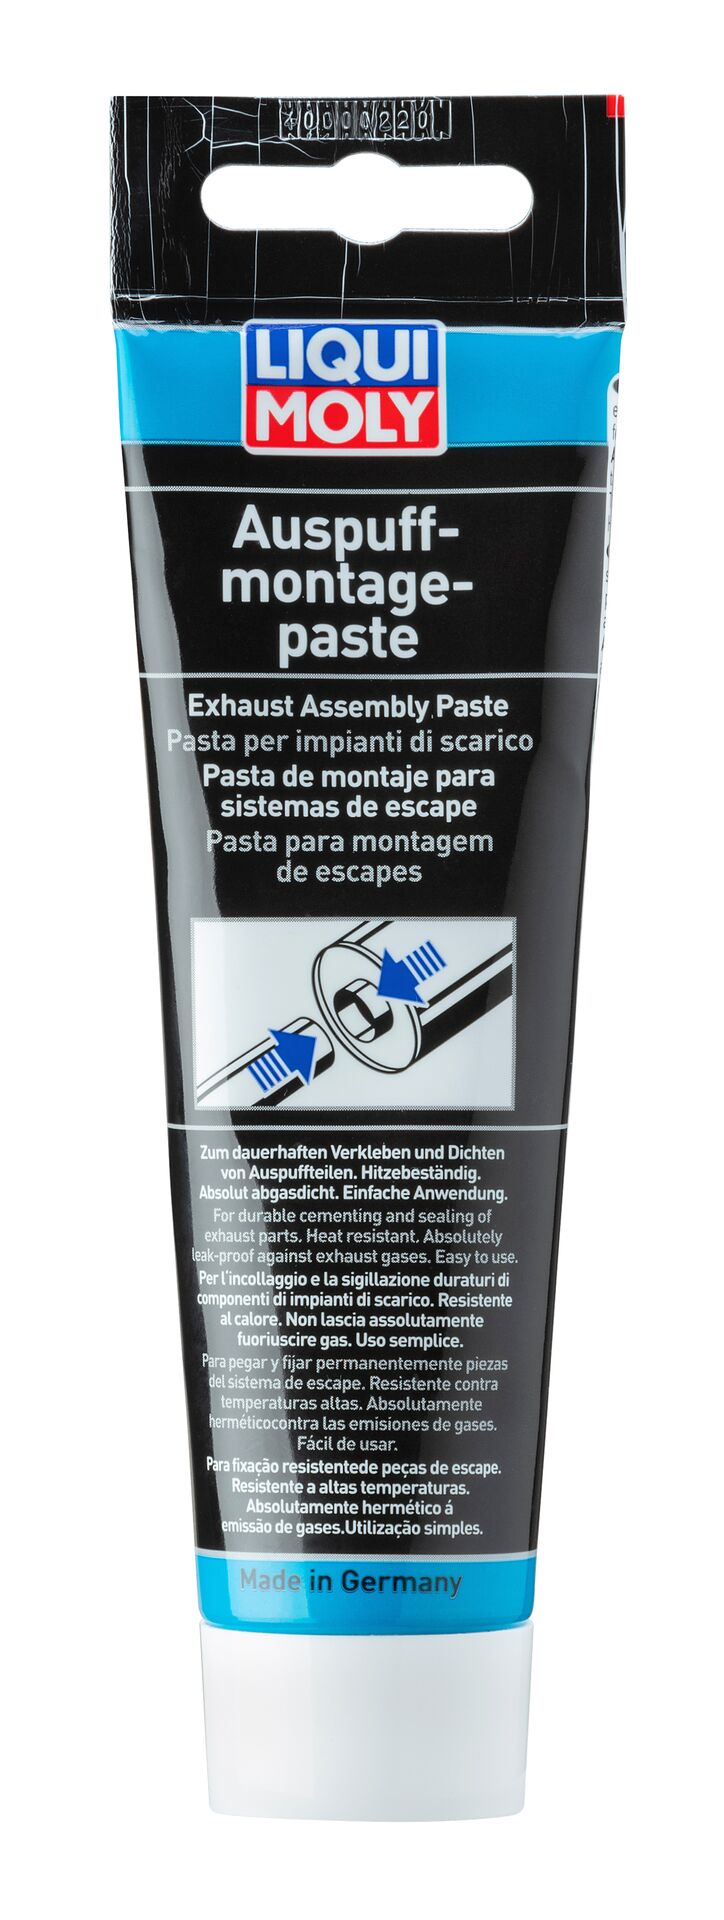 Liqui Moly 150g Auspuff-Montage-Paste Dichtmasse Exhaust Assembly